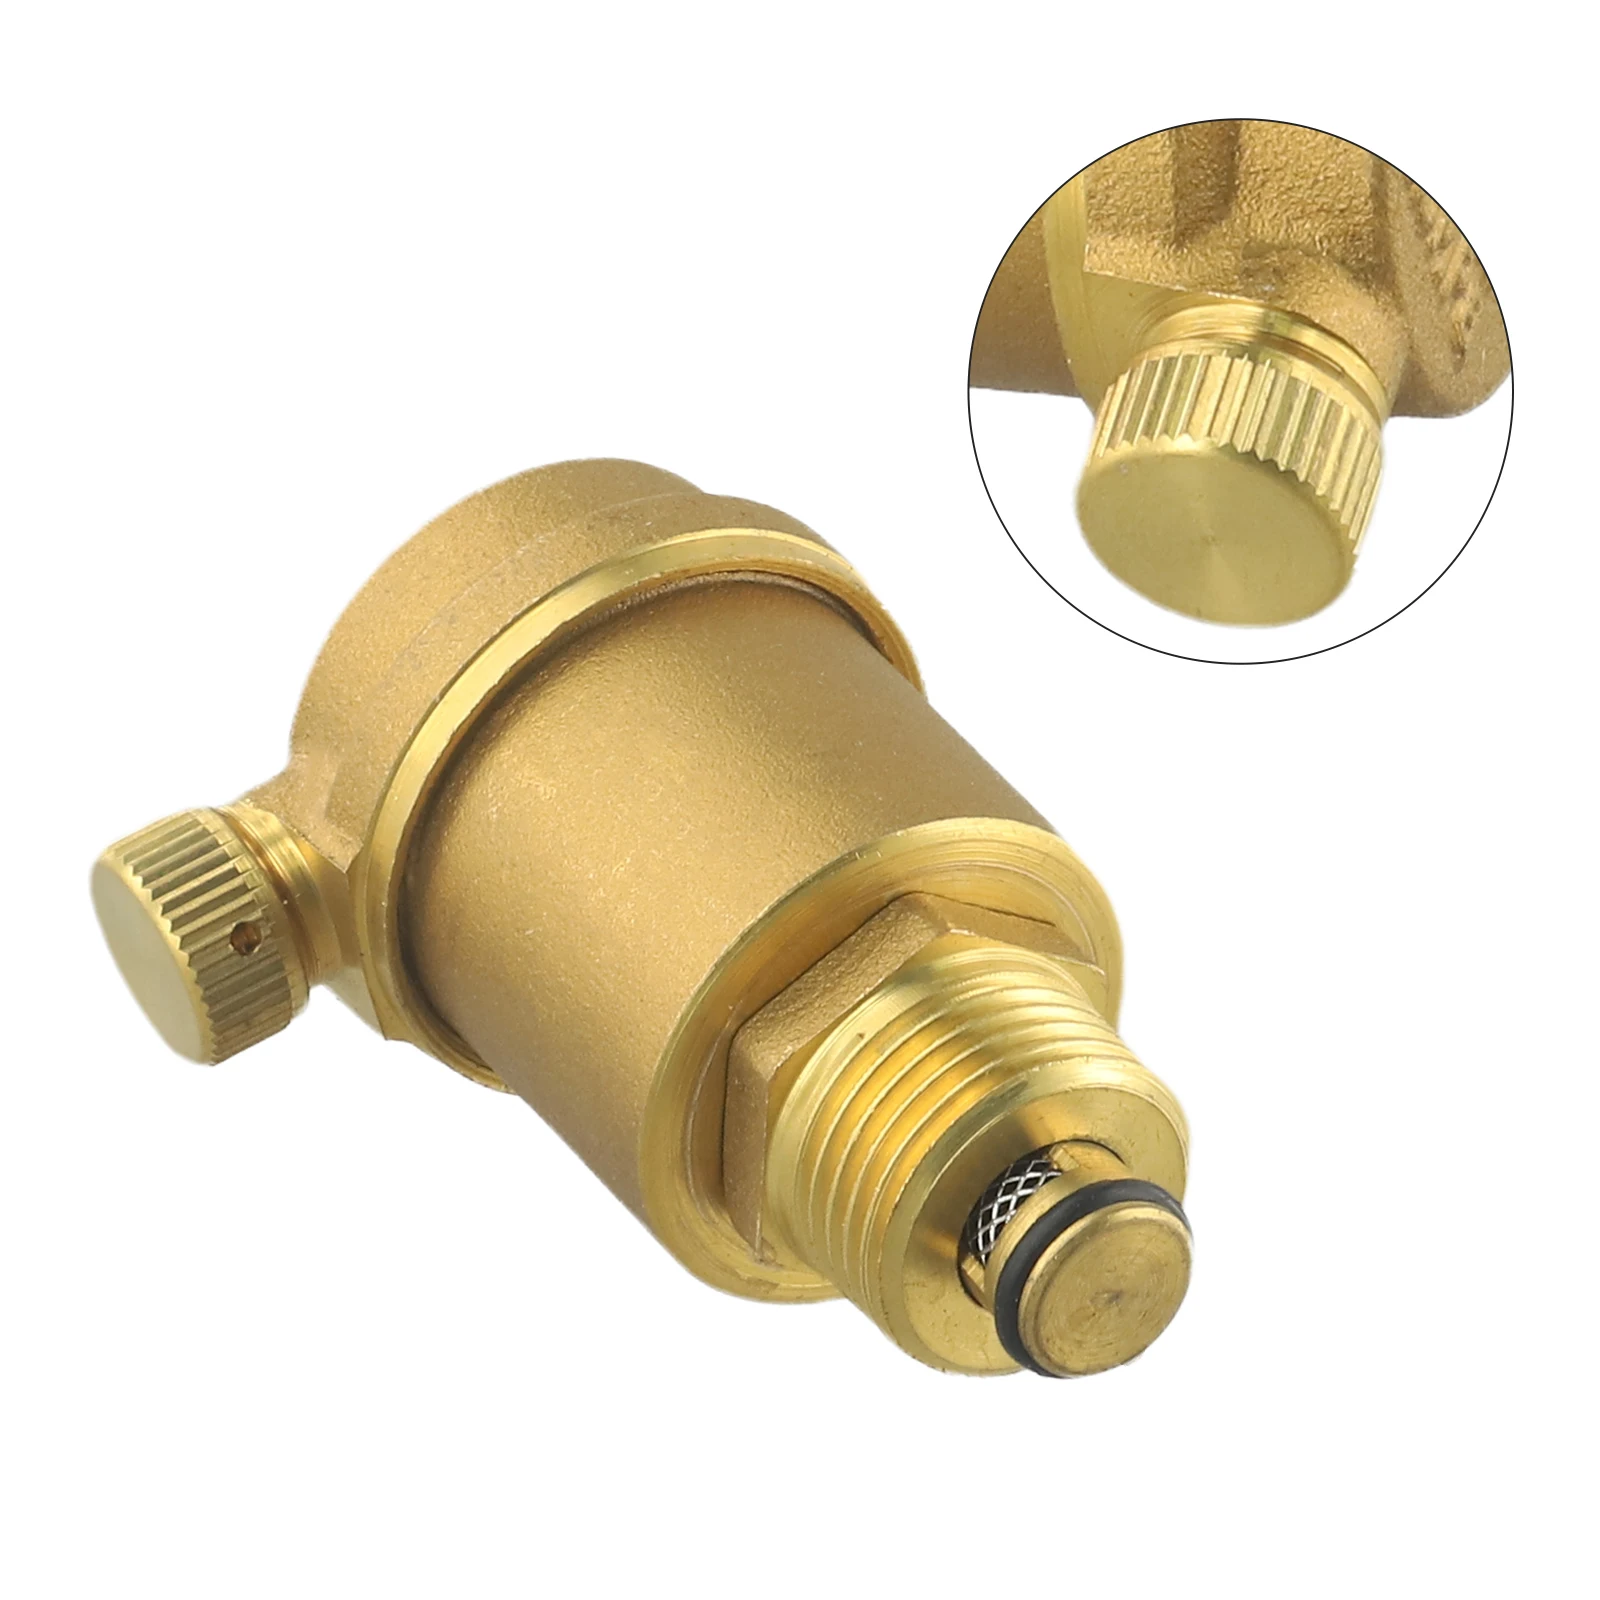 

Accessories Repair Tools Bleed Valve Pressure Release 1/2\\\" BSP 61mm Automatic Brass Fittings Gold Water Heater